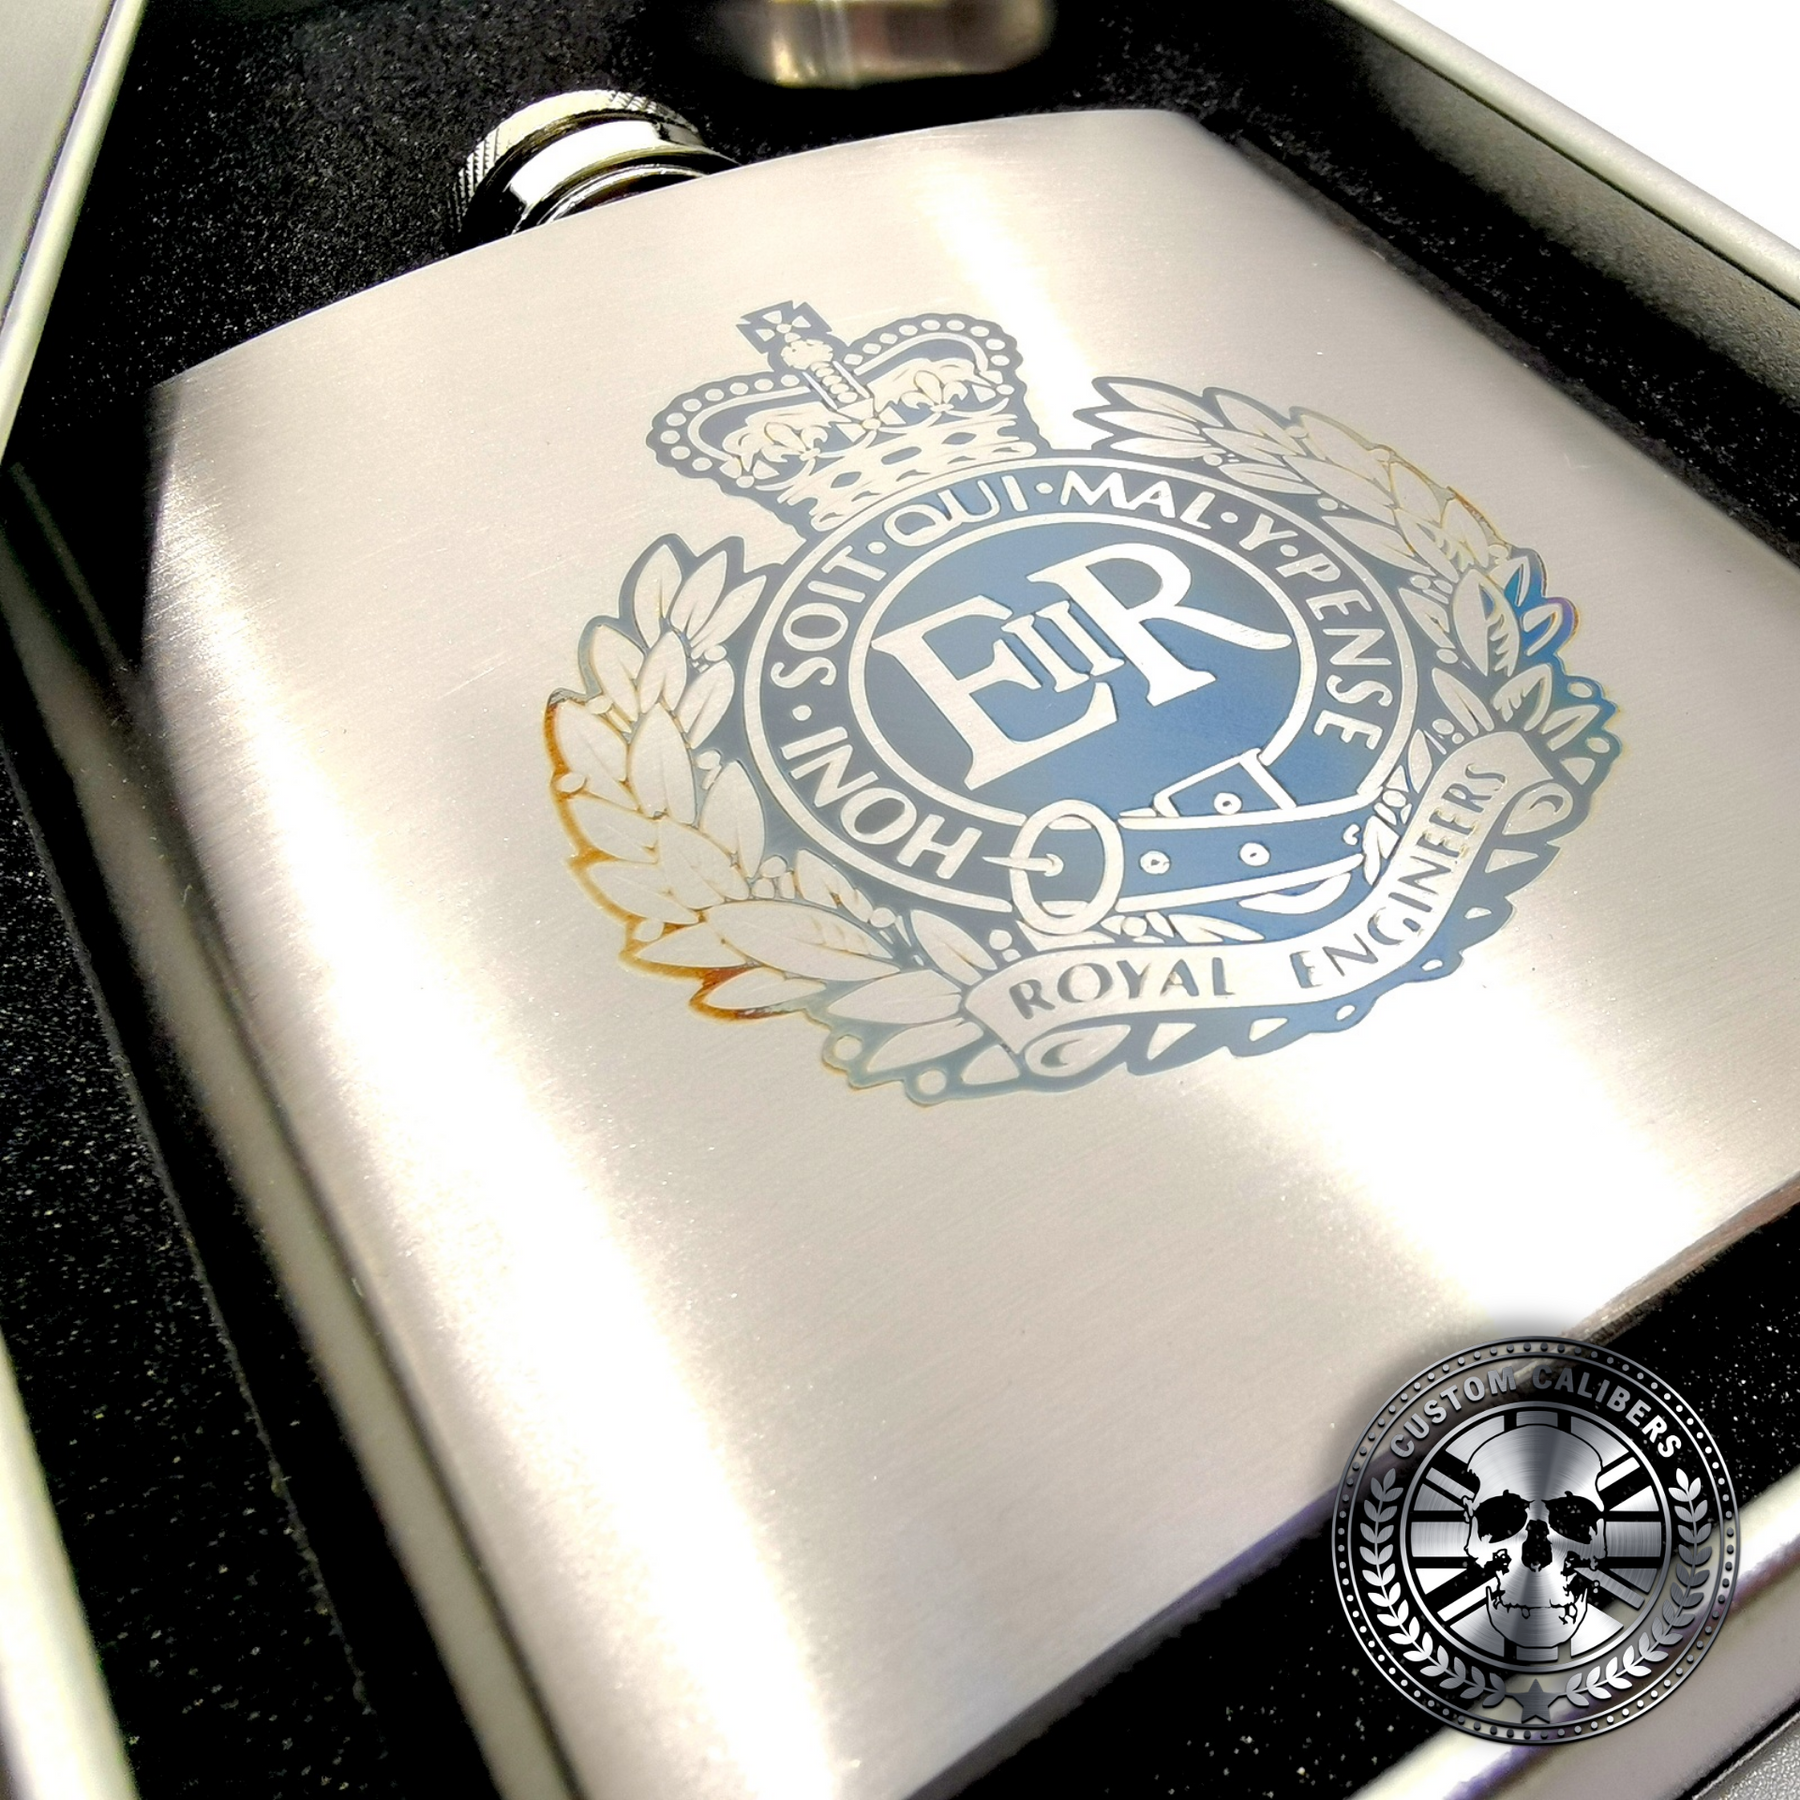 a brushed stainless steel hip flask engraved with a military crest